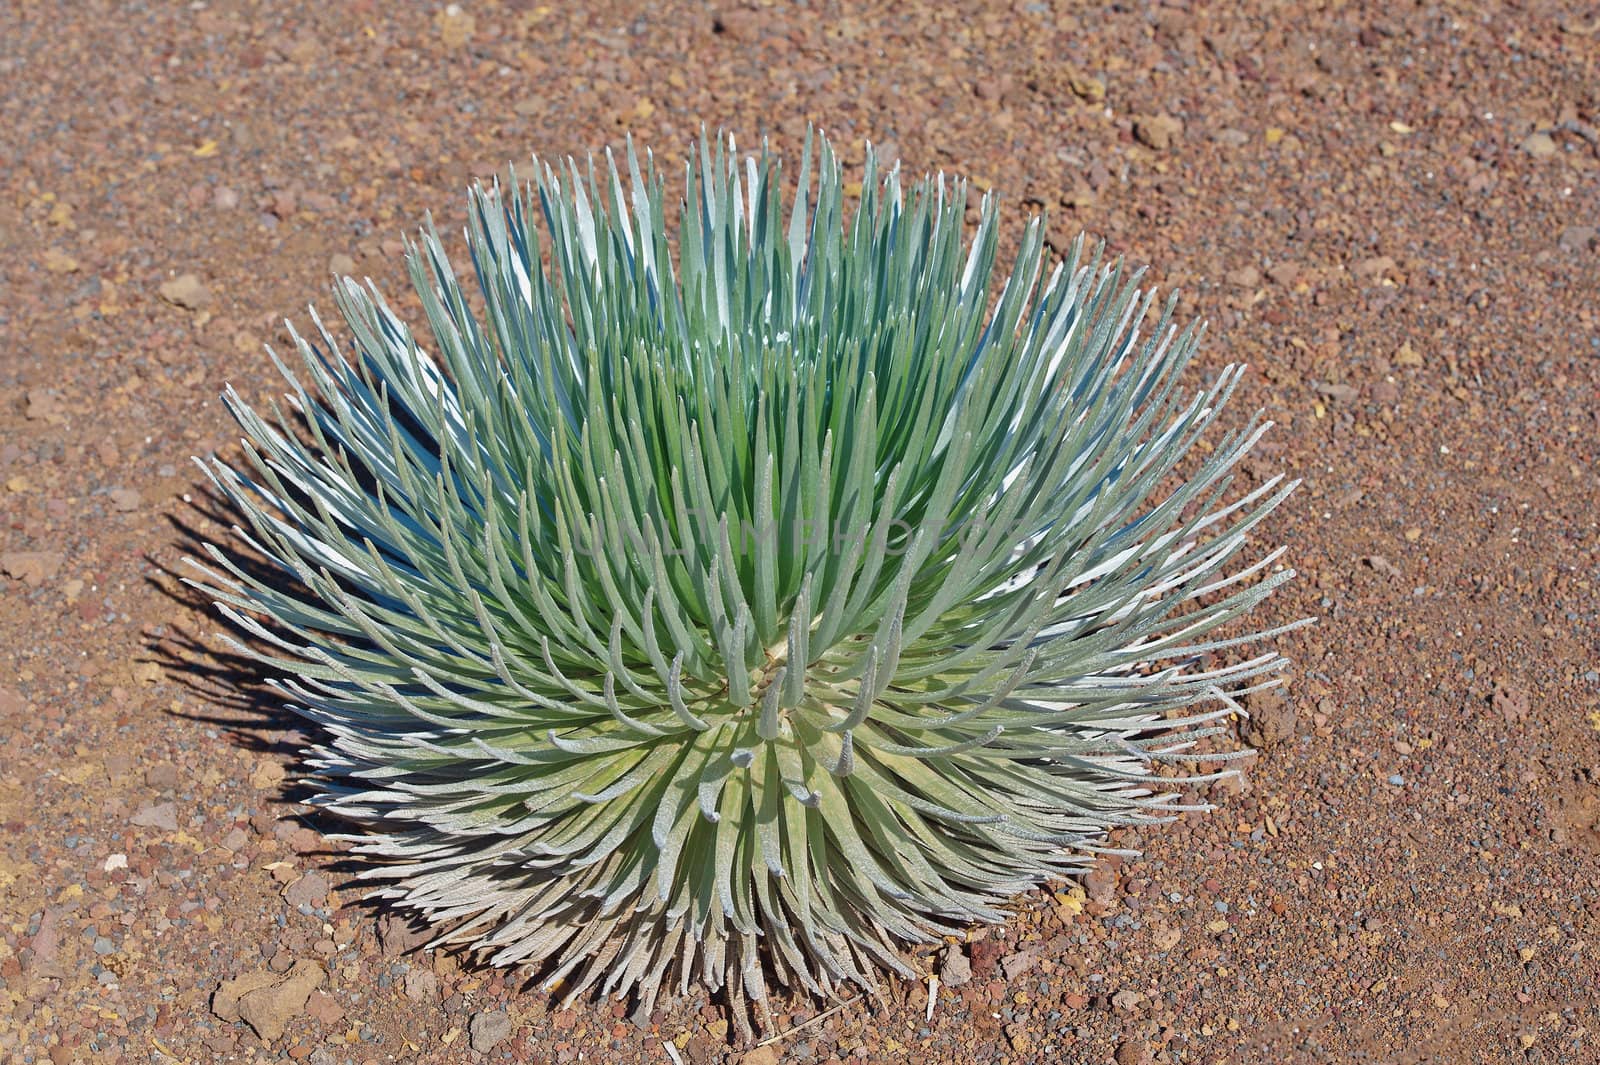 Haleakala Silversword is a rare plant that only grows in cold and dry high altitude on Haleakala Volcano, Maui Island, Hawaii, USA. This plant is only found on the island of Maui in Haleakalā National Park at an elevation of 2,100 to 3,000 m on the Haleakalā summit depression, the rim summits, and surrounding slopes of the dormant Haleakalā Volcano.
